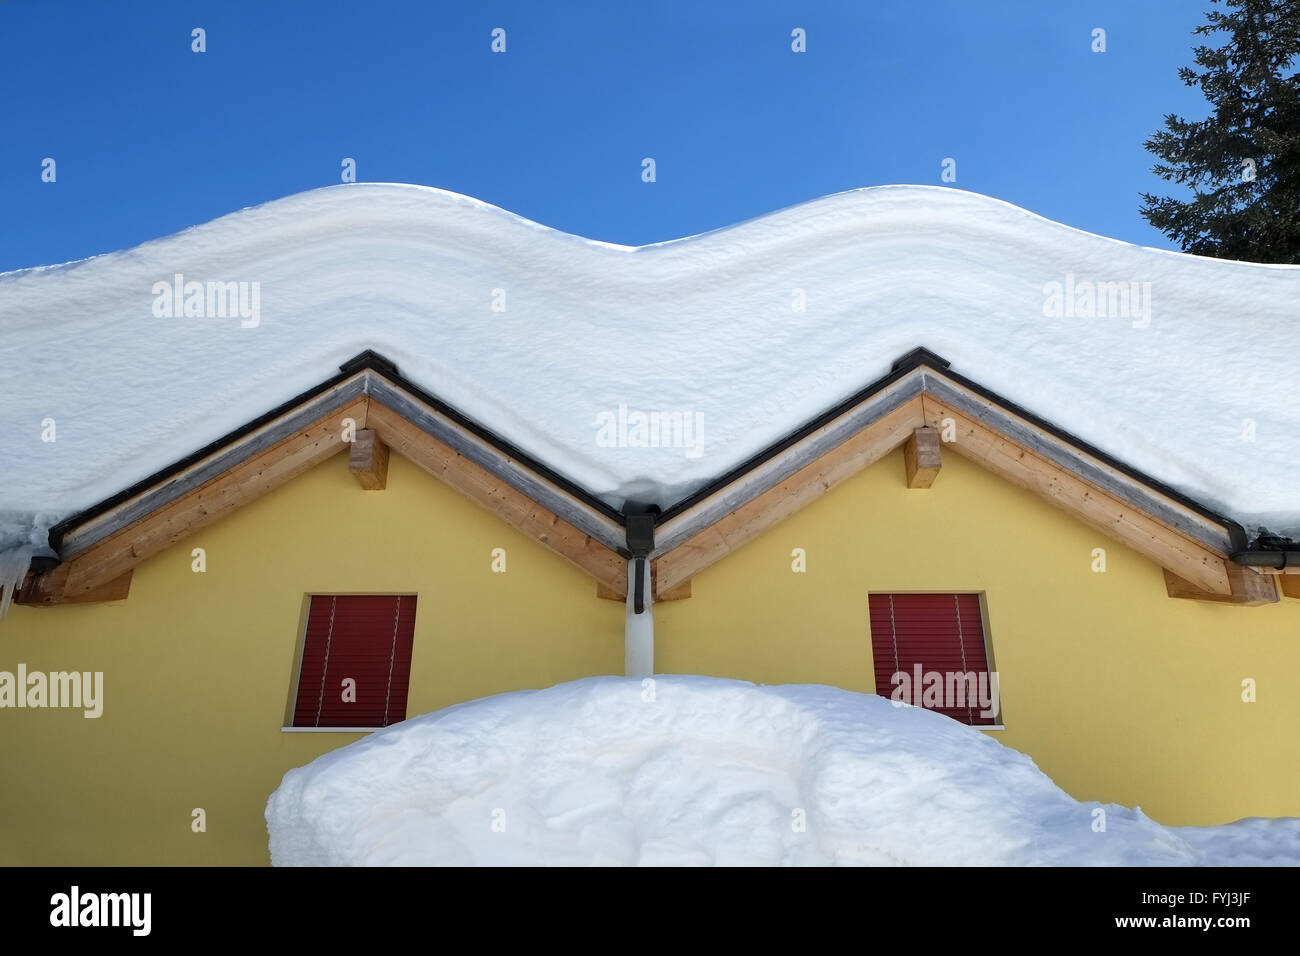 A dome of snow sitting on roofs Stock Photo